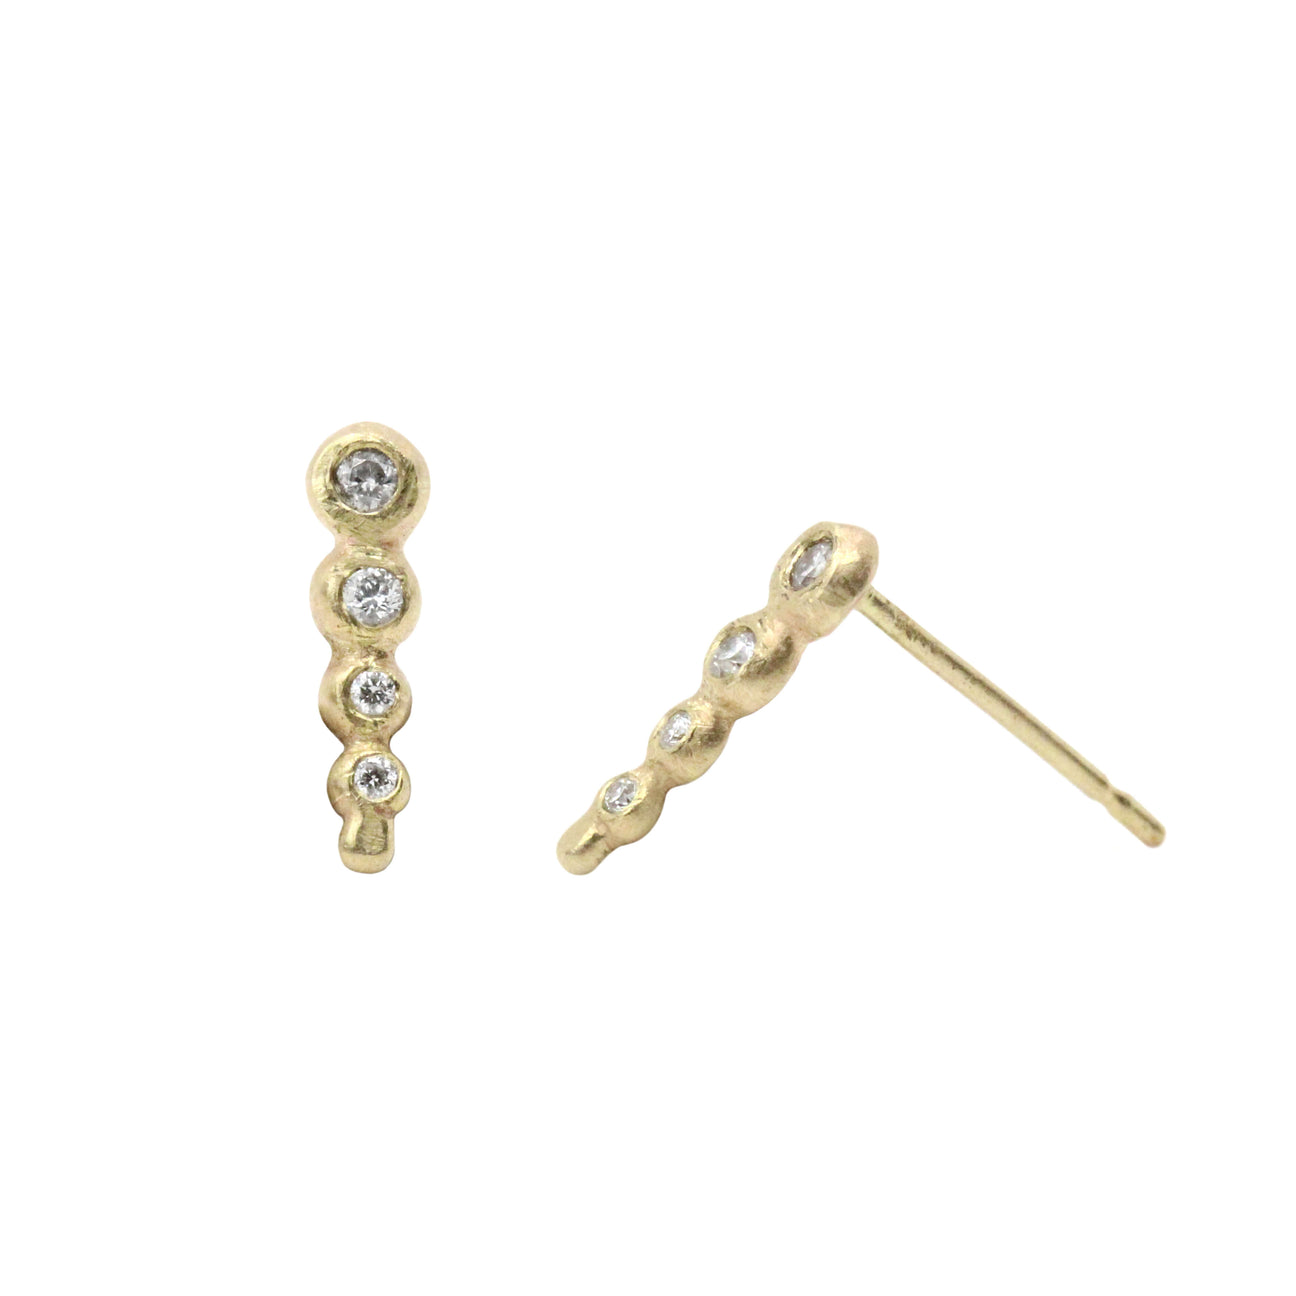 Four diamond droplet stud earring pictured on a white background